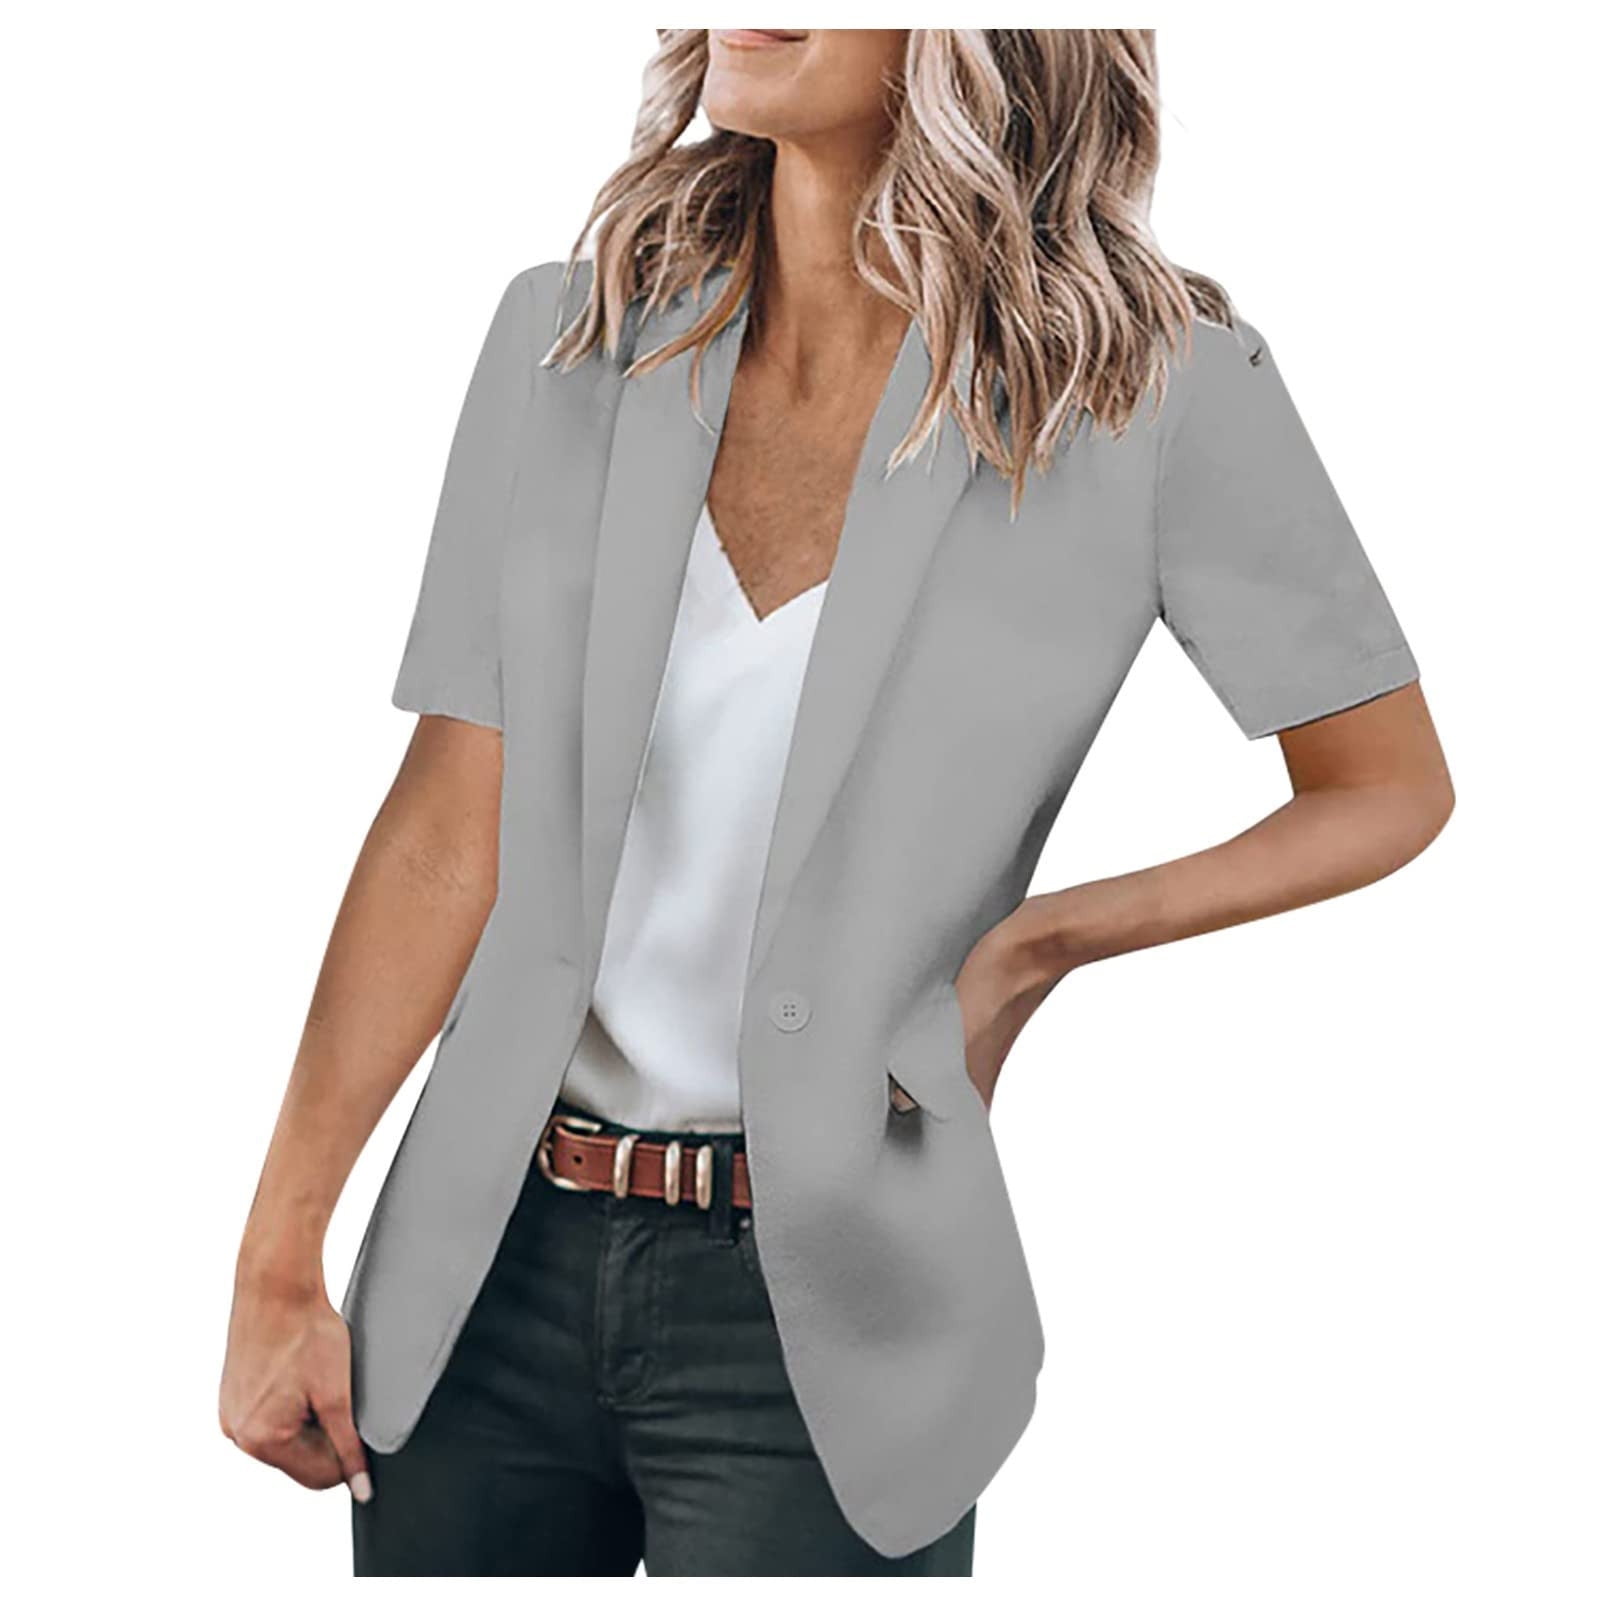 Business Pants Suit Women New Fashion Temperament Long Sleeve Slim Blazer  And Trousers Office Lady Formal Interview Work Wear